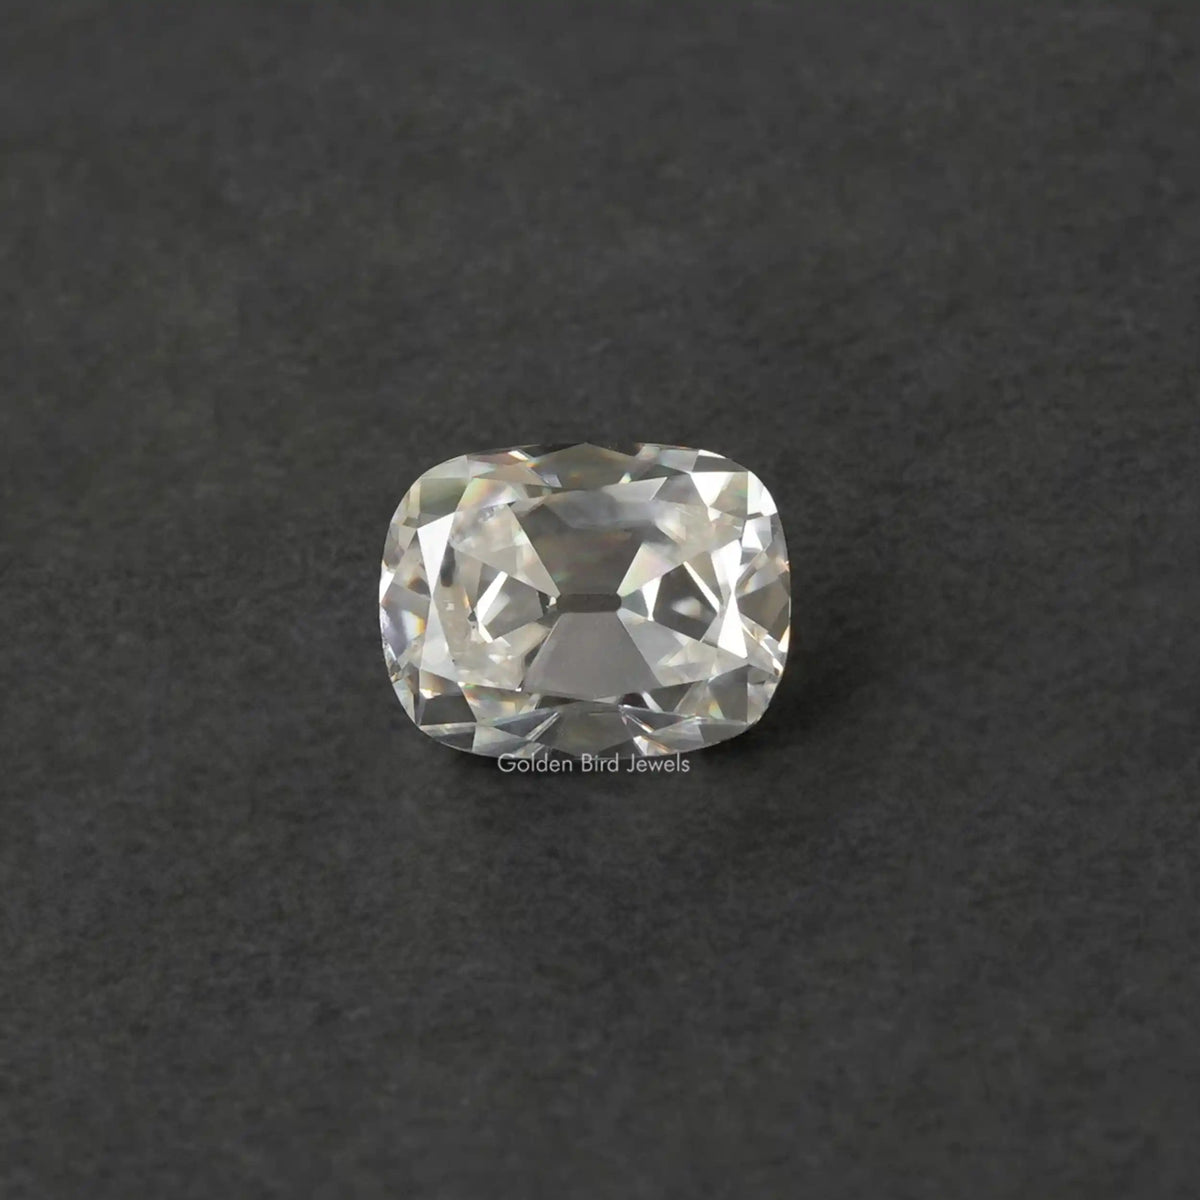 [Front view of 5.20 carat old mine cushion cut loose moissanite]-[Golden Bird Jewels]